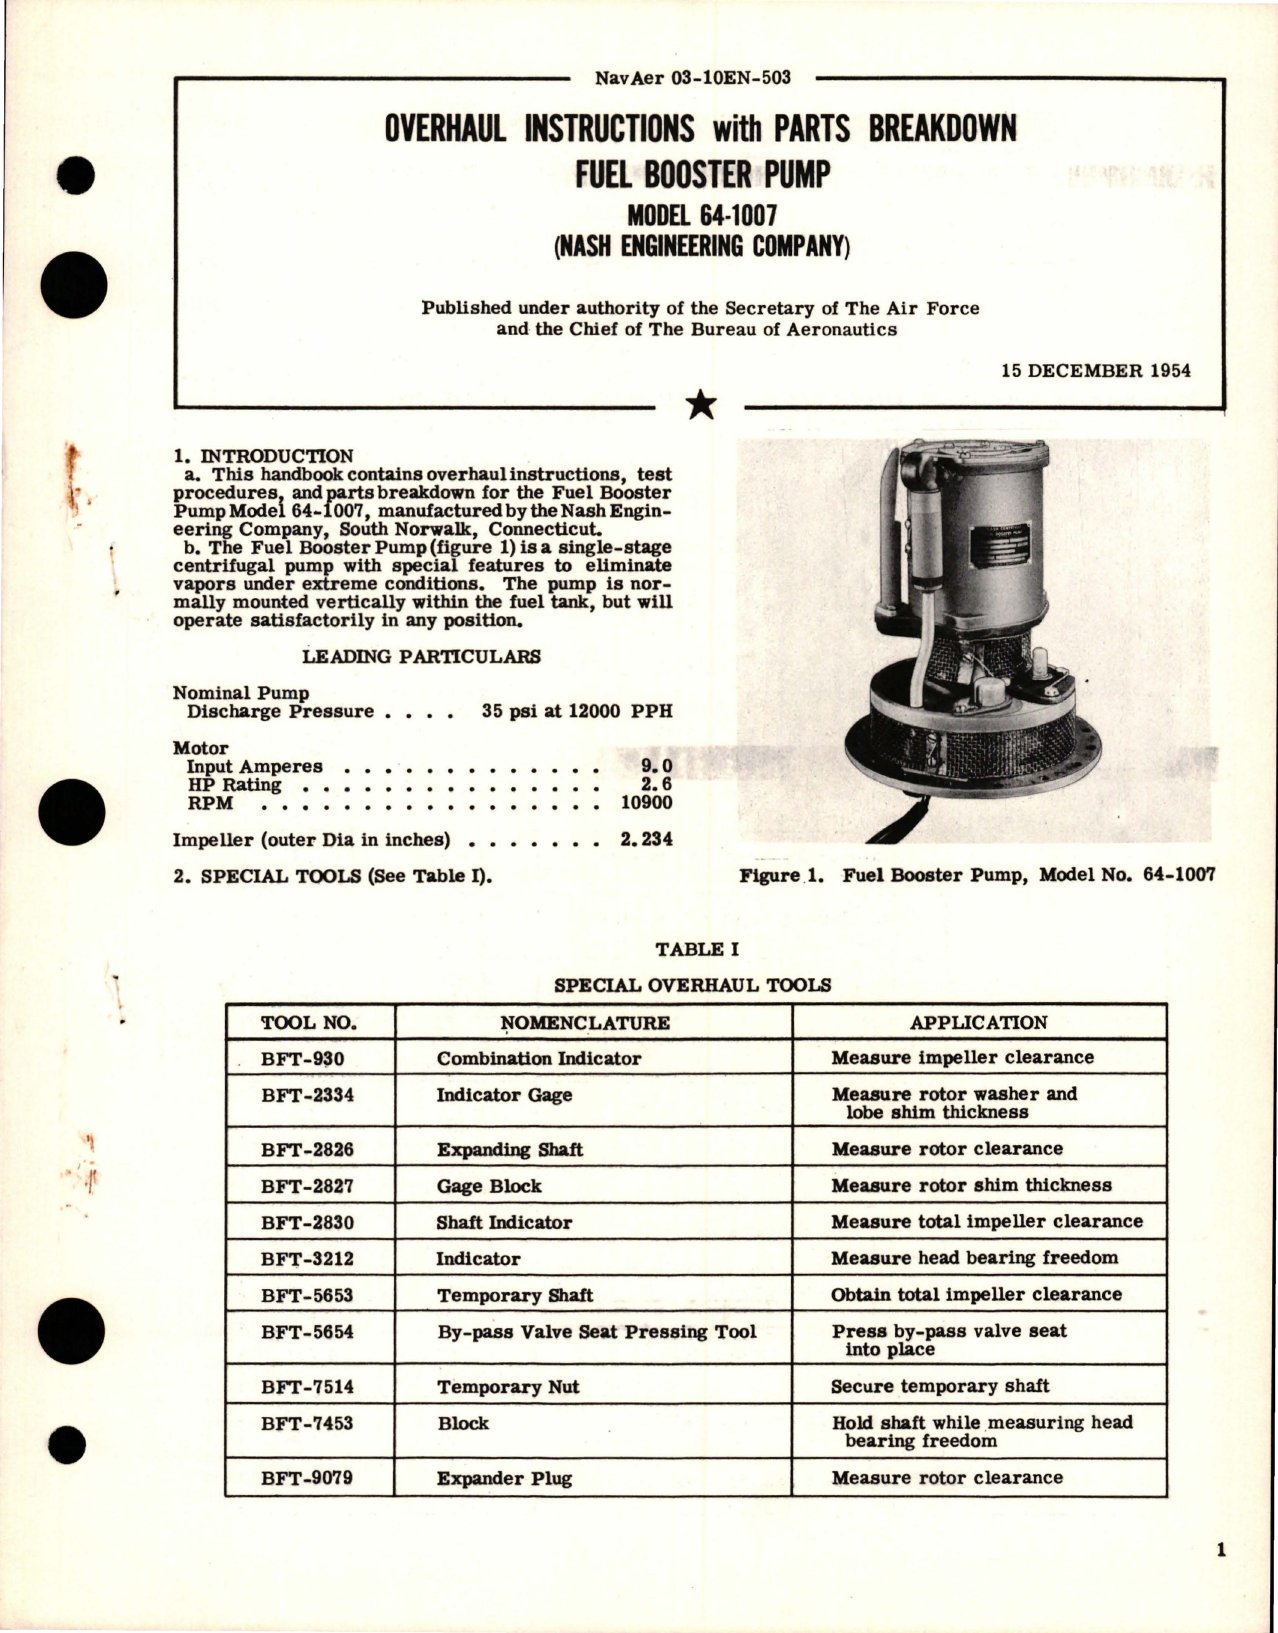 Sample page 1 from AirCorps Library document: Overhaul Instructions with Parts Breakdown for Fuel Booster Pump - Model 64-1007 